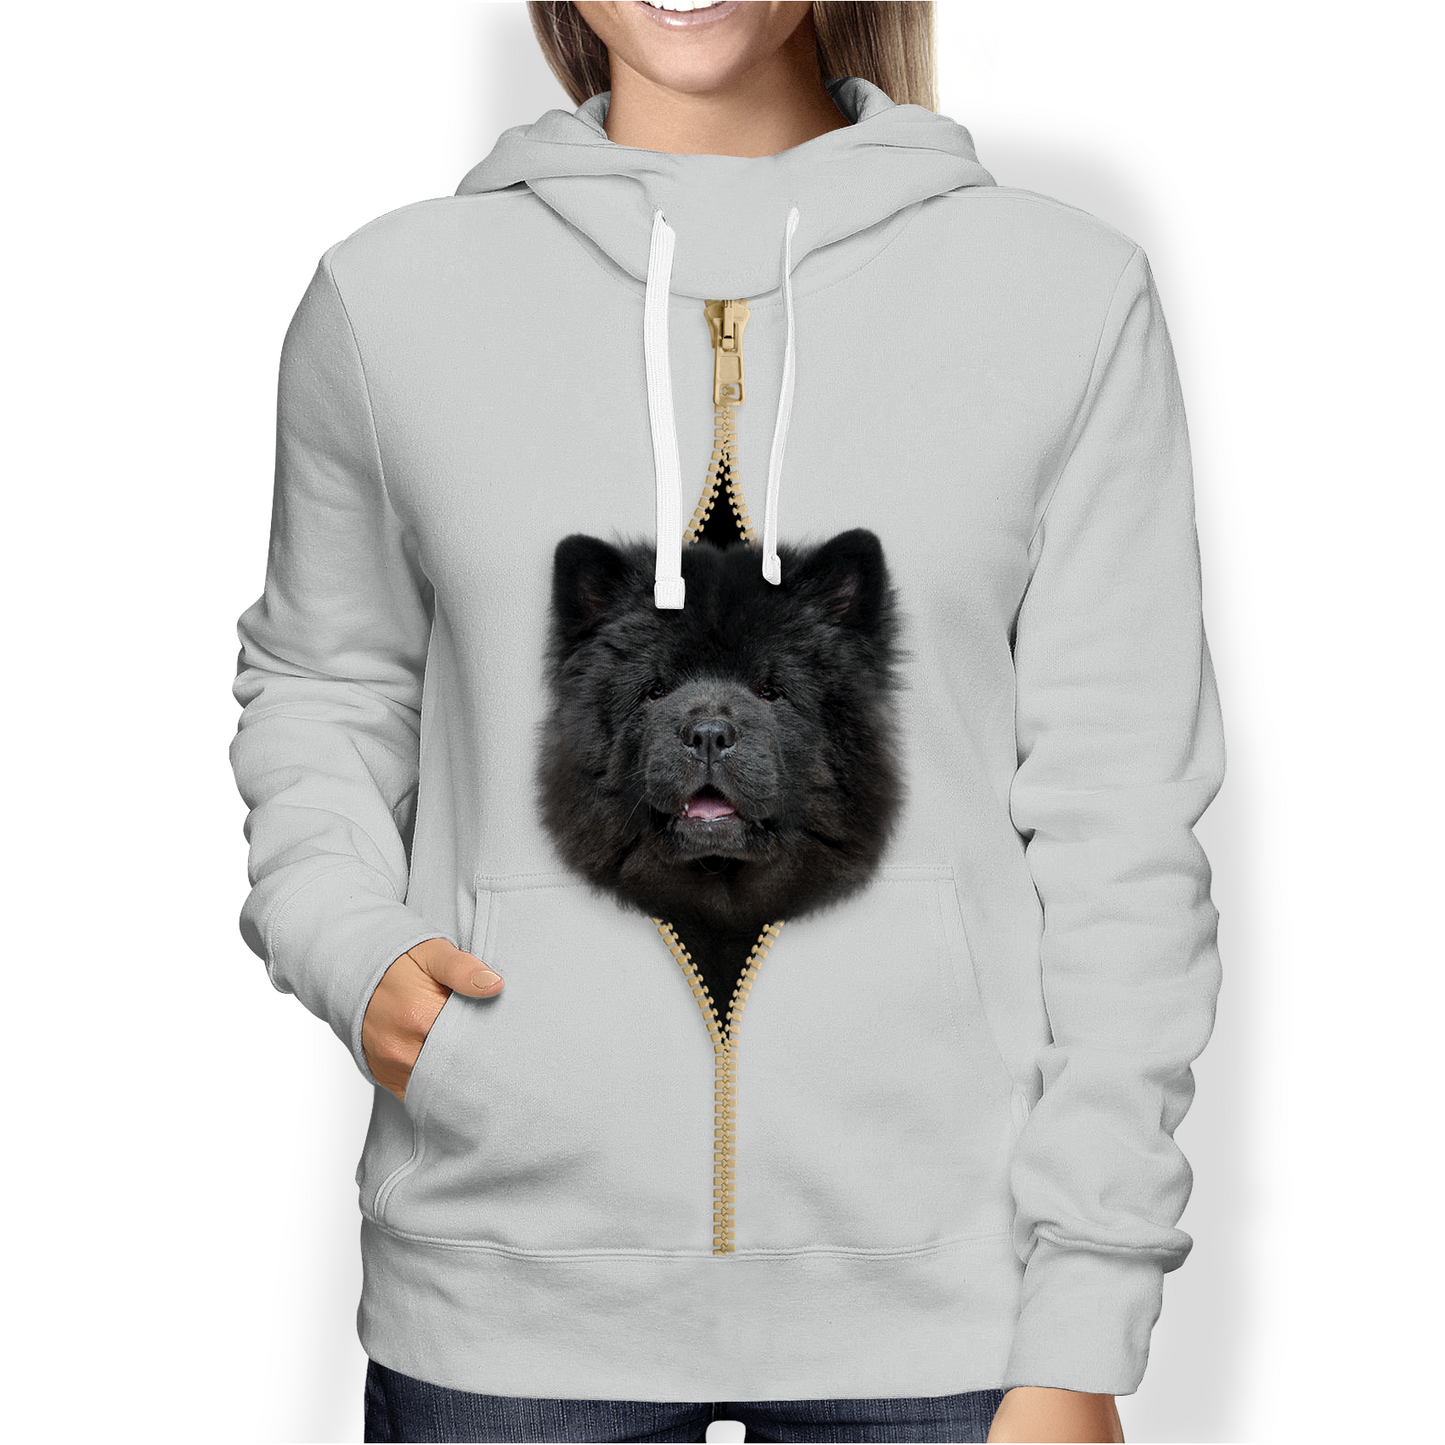 I'm With You - Chow Chow Hoodie V2